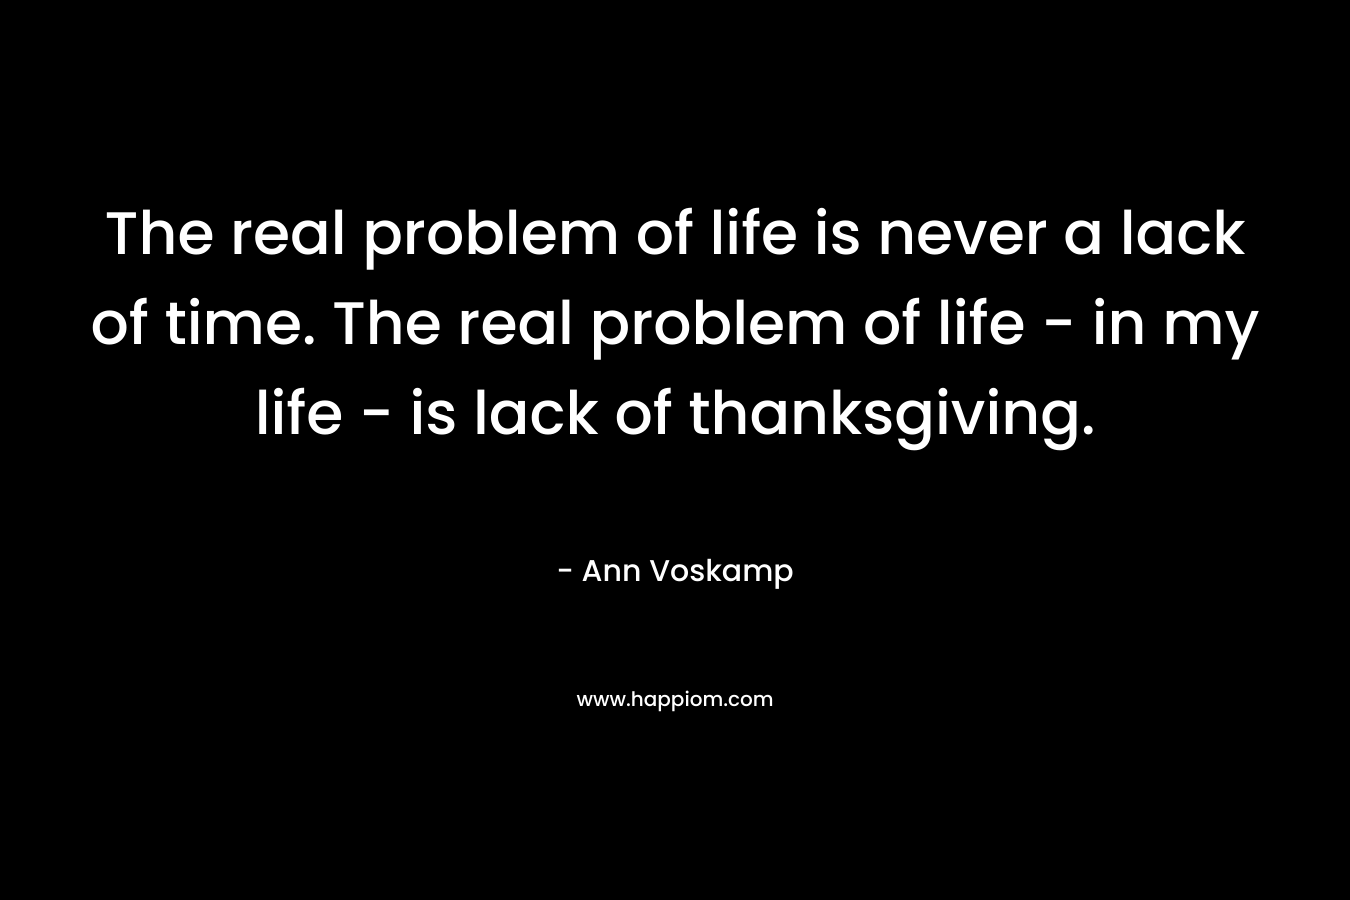 The real problem of life is never a lack of time. The real problem of life - in my life - is lack of thanksgiving.